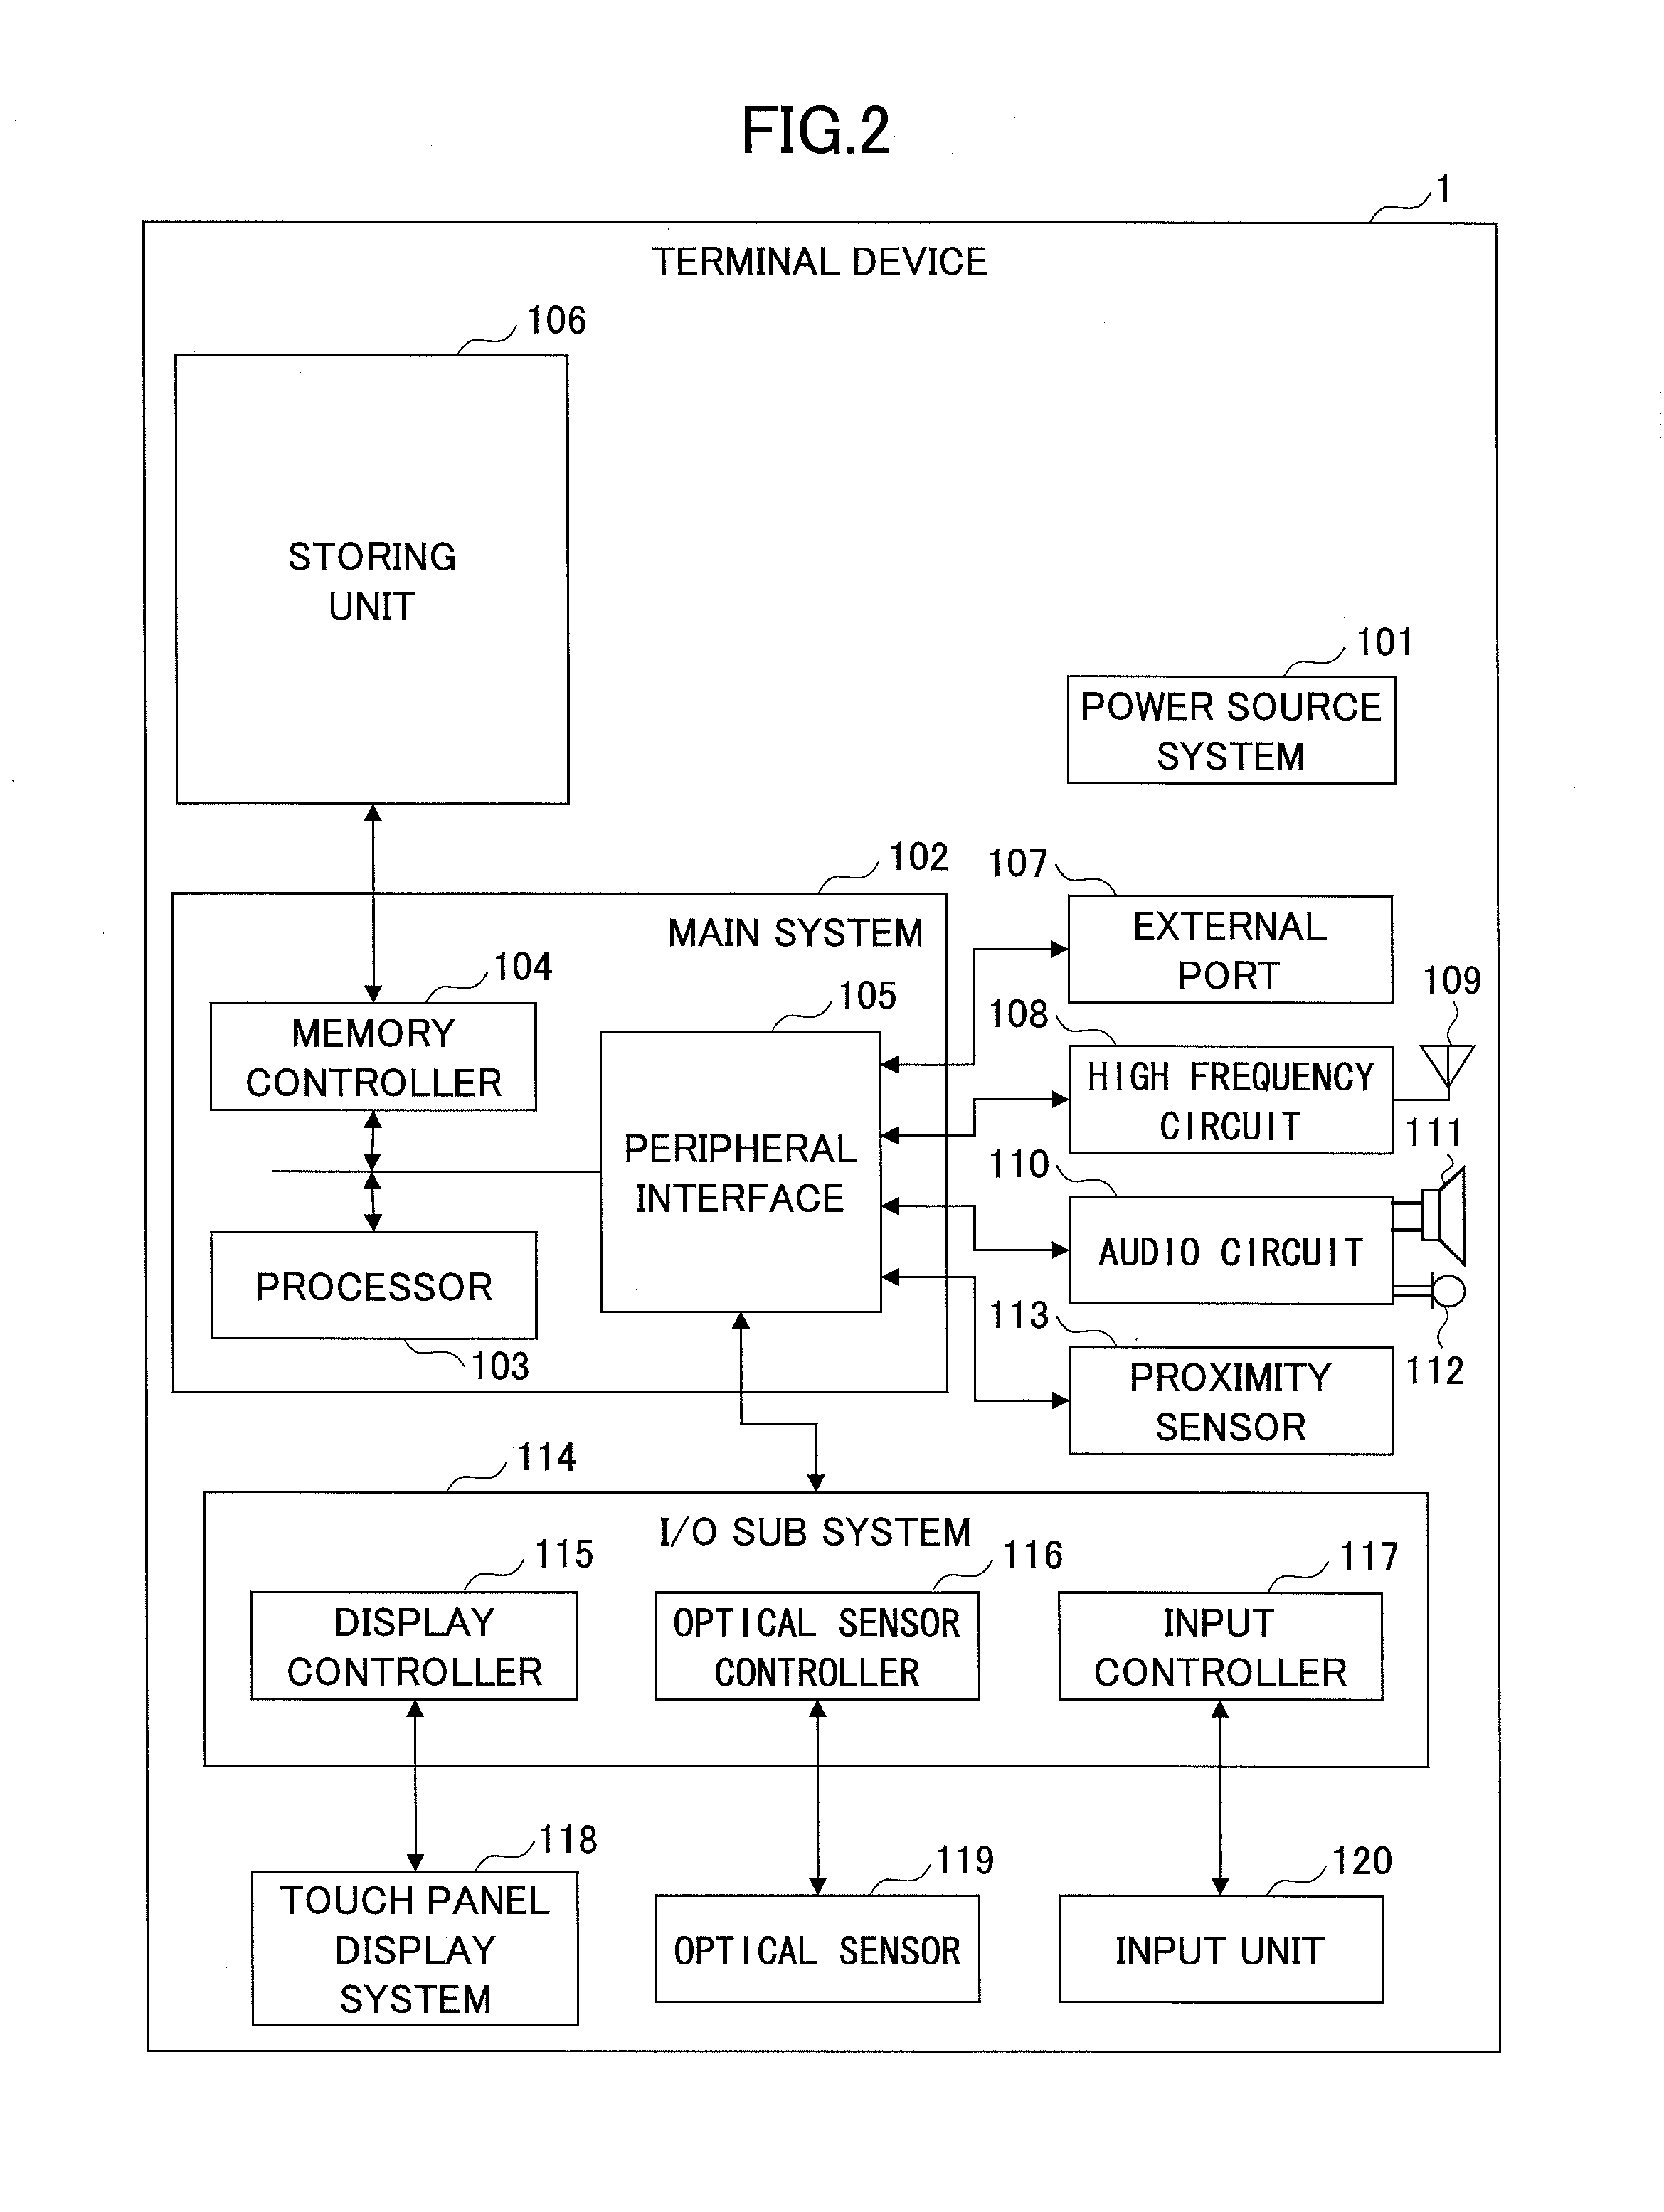 Game processing server apparatus and game processing server system